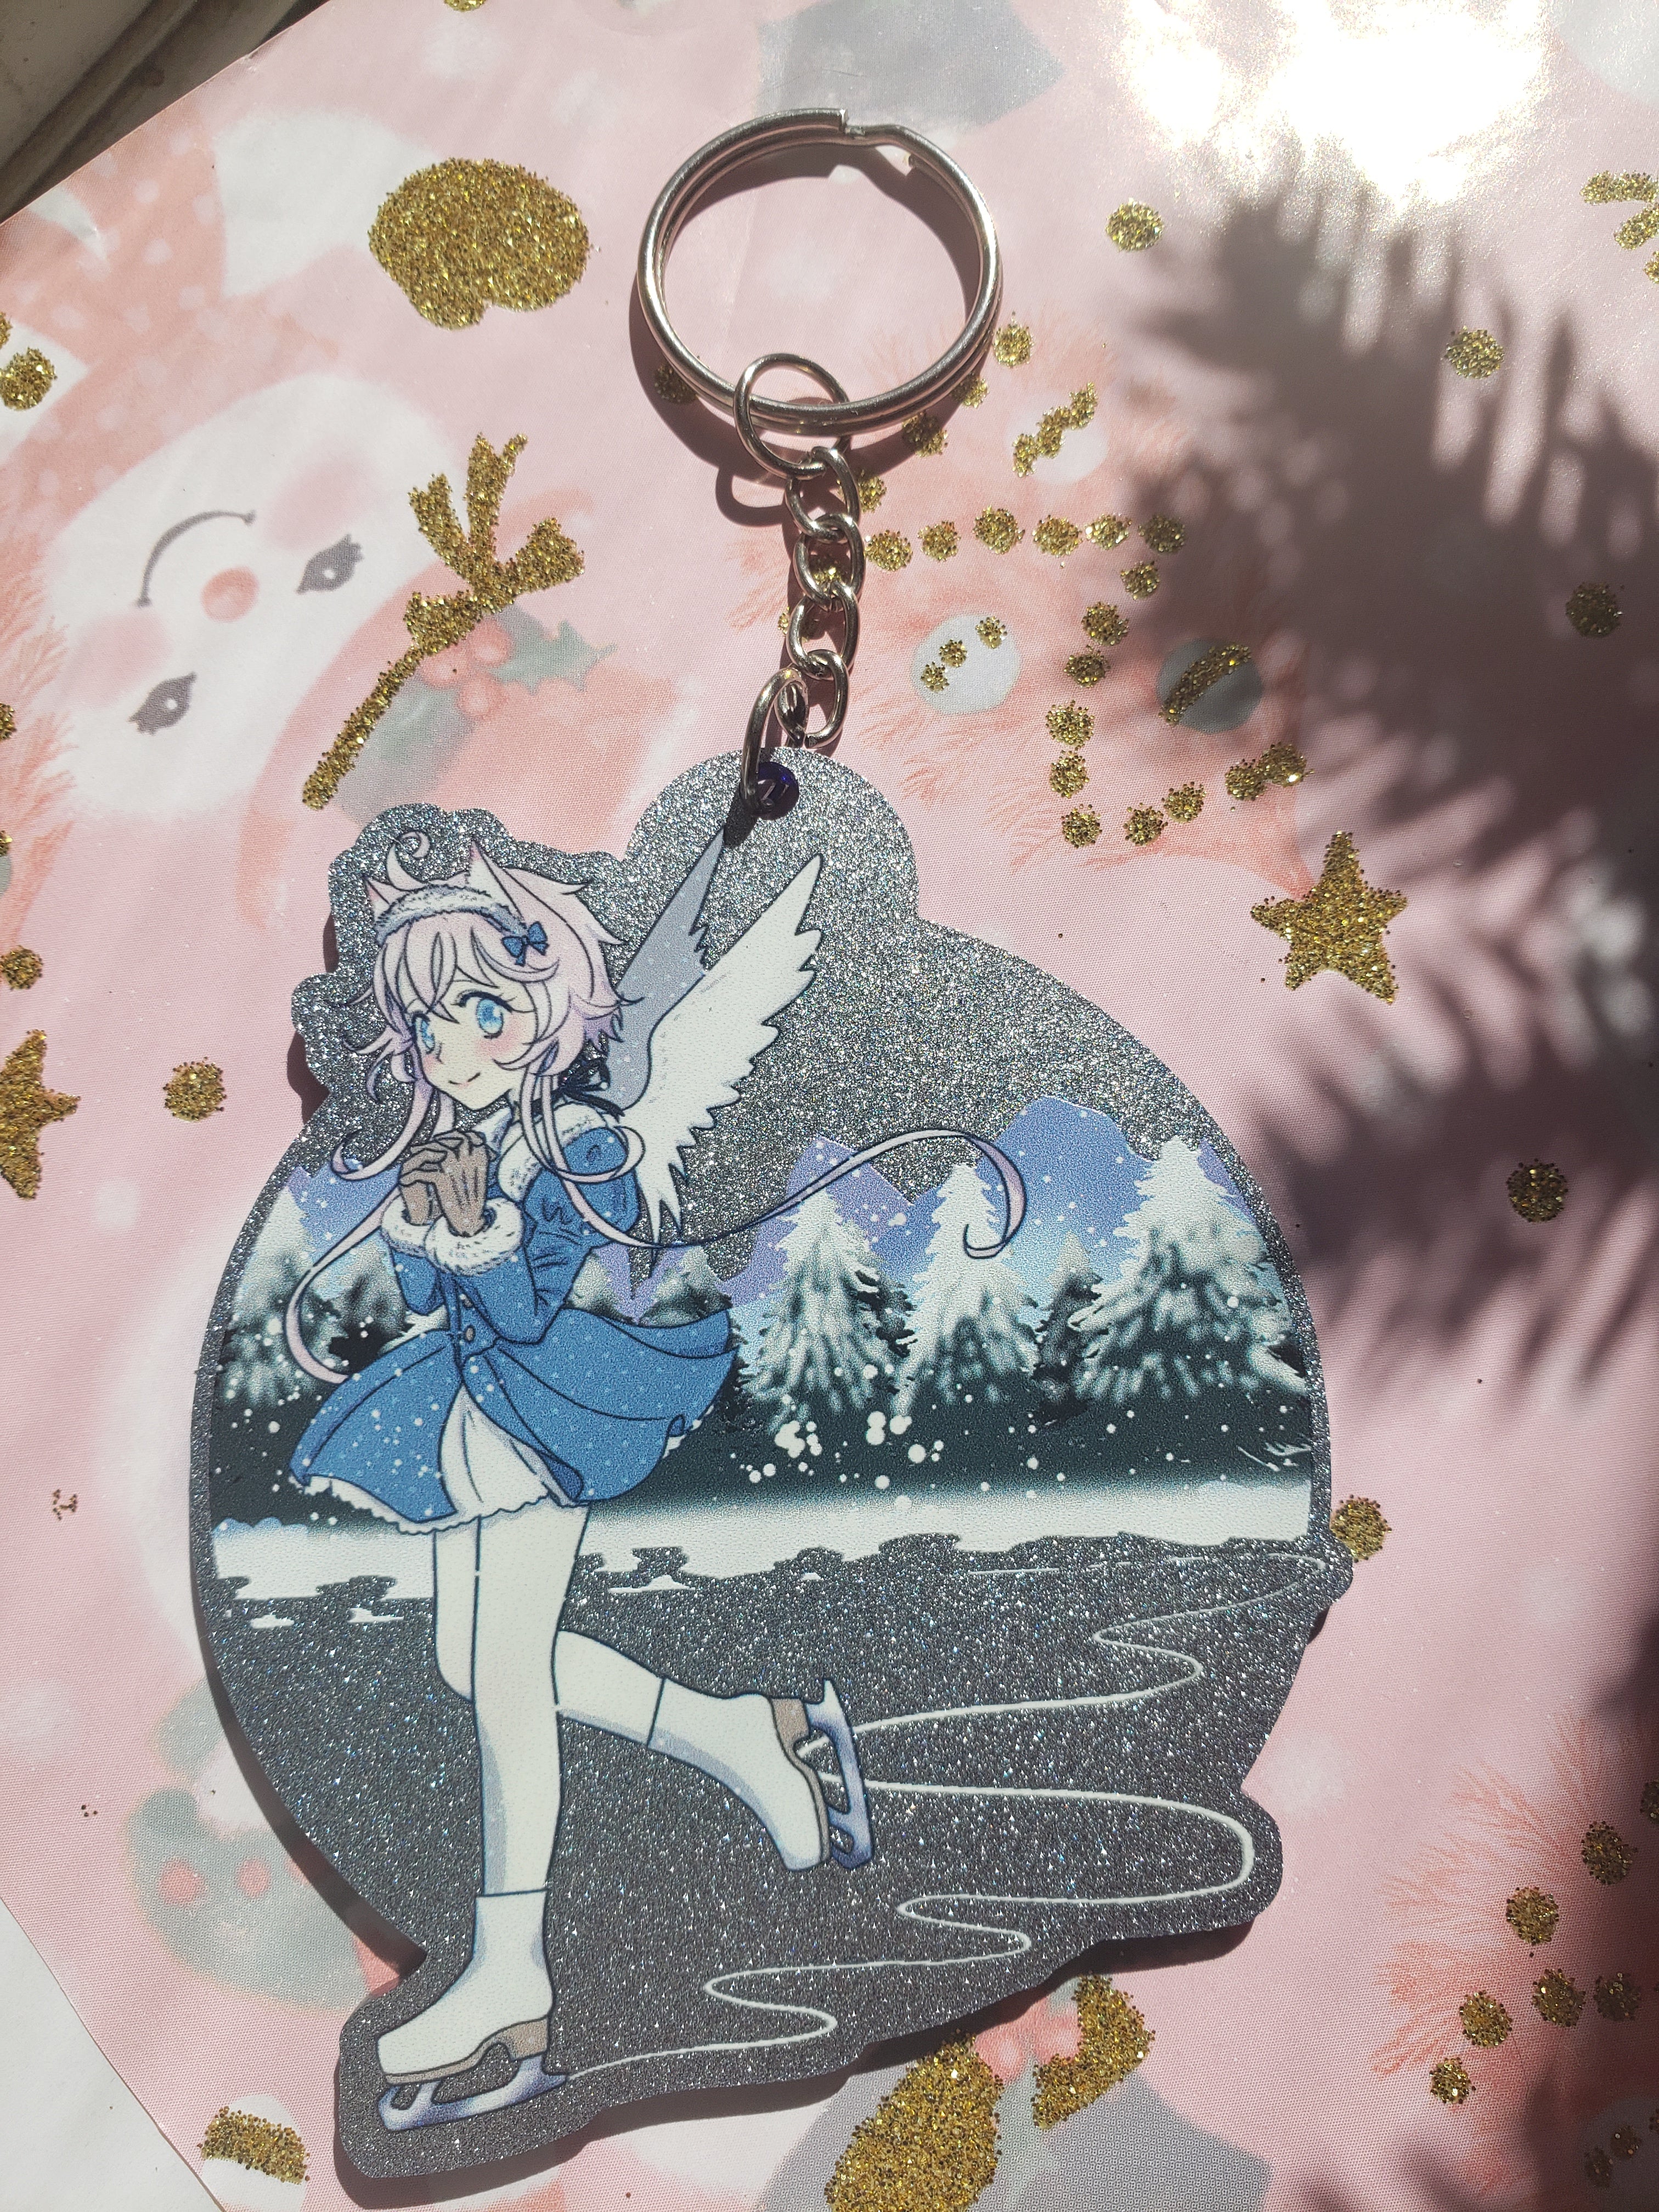 Iceskating snow angel keychain - blue glitter arcylic featuring character from Magical Princess Sky original manga